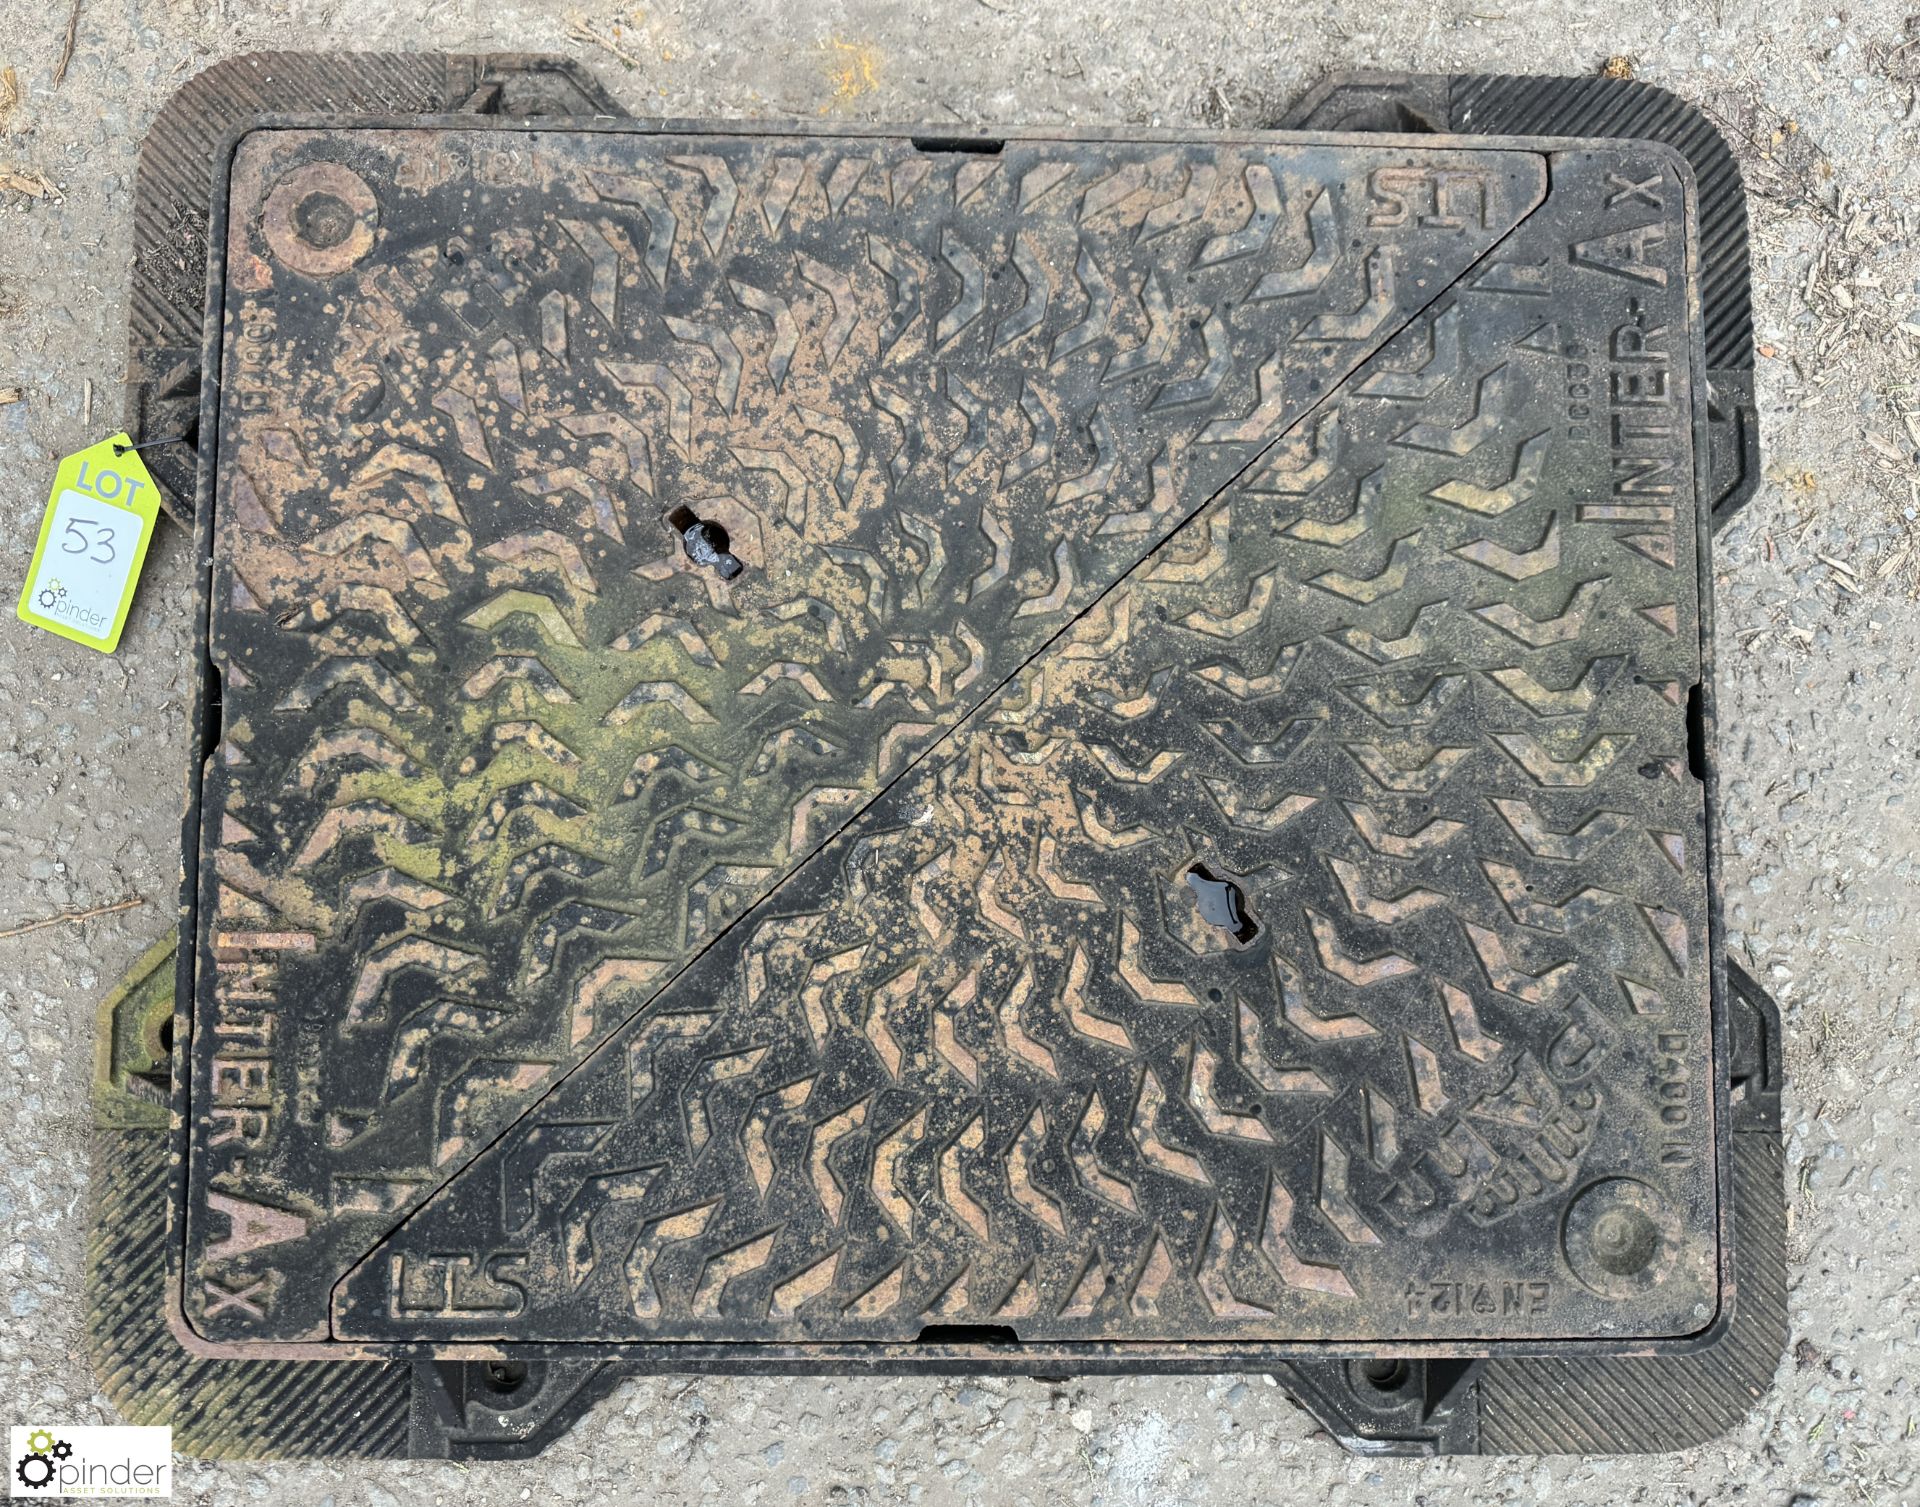 Inter Ax cast iron Manhole Cover, 780mm x 630mm - Image 2 of 3